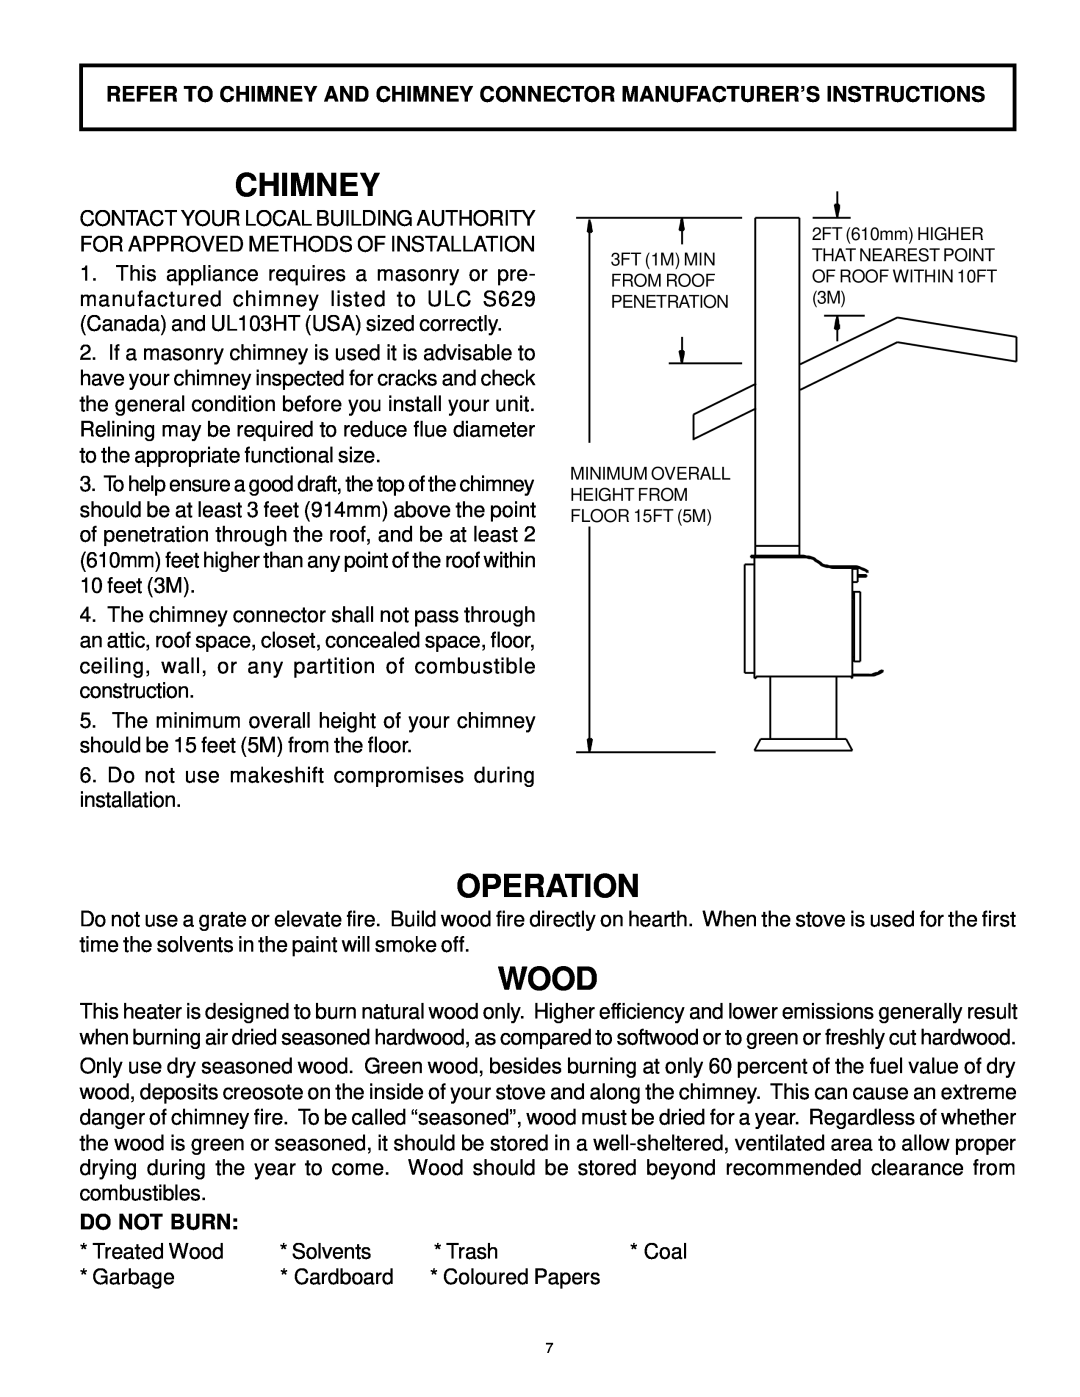 Vermont Casting AIR TIGHT WOOD STOVE owner manual Chimney, Wood, Operation, Do Not Burn 